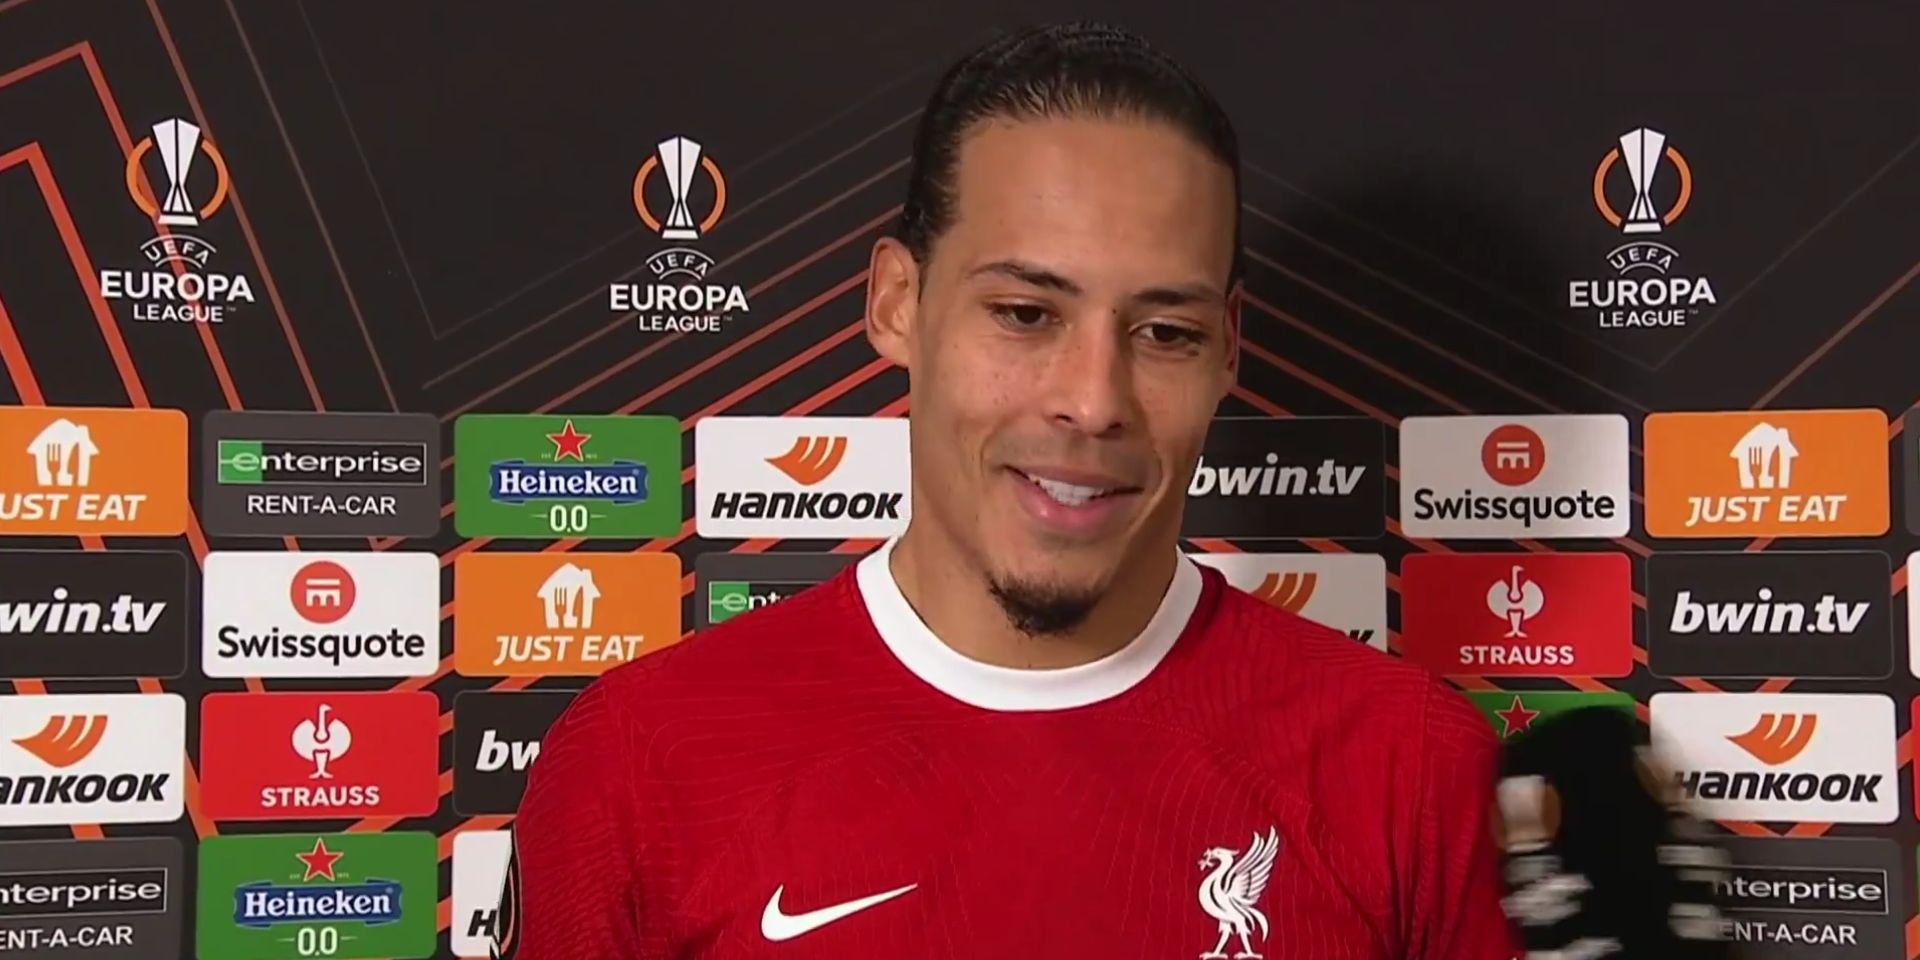 (Video) “The reality is…”: Van Dijk’s honest message to fans and teammates after Europa elimination